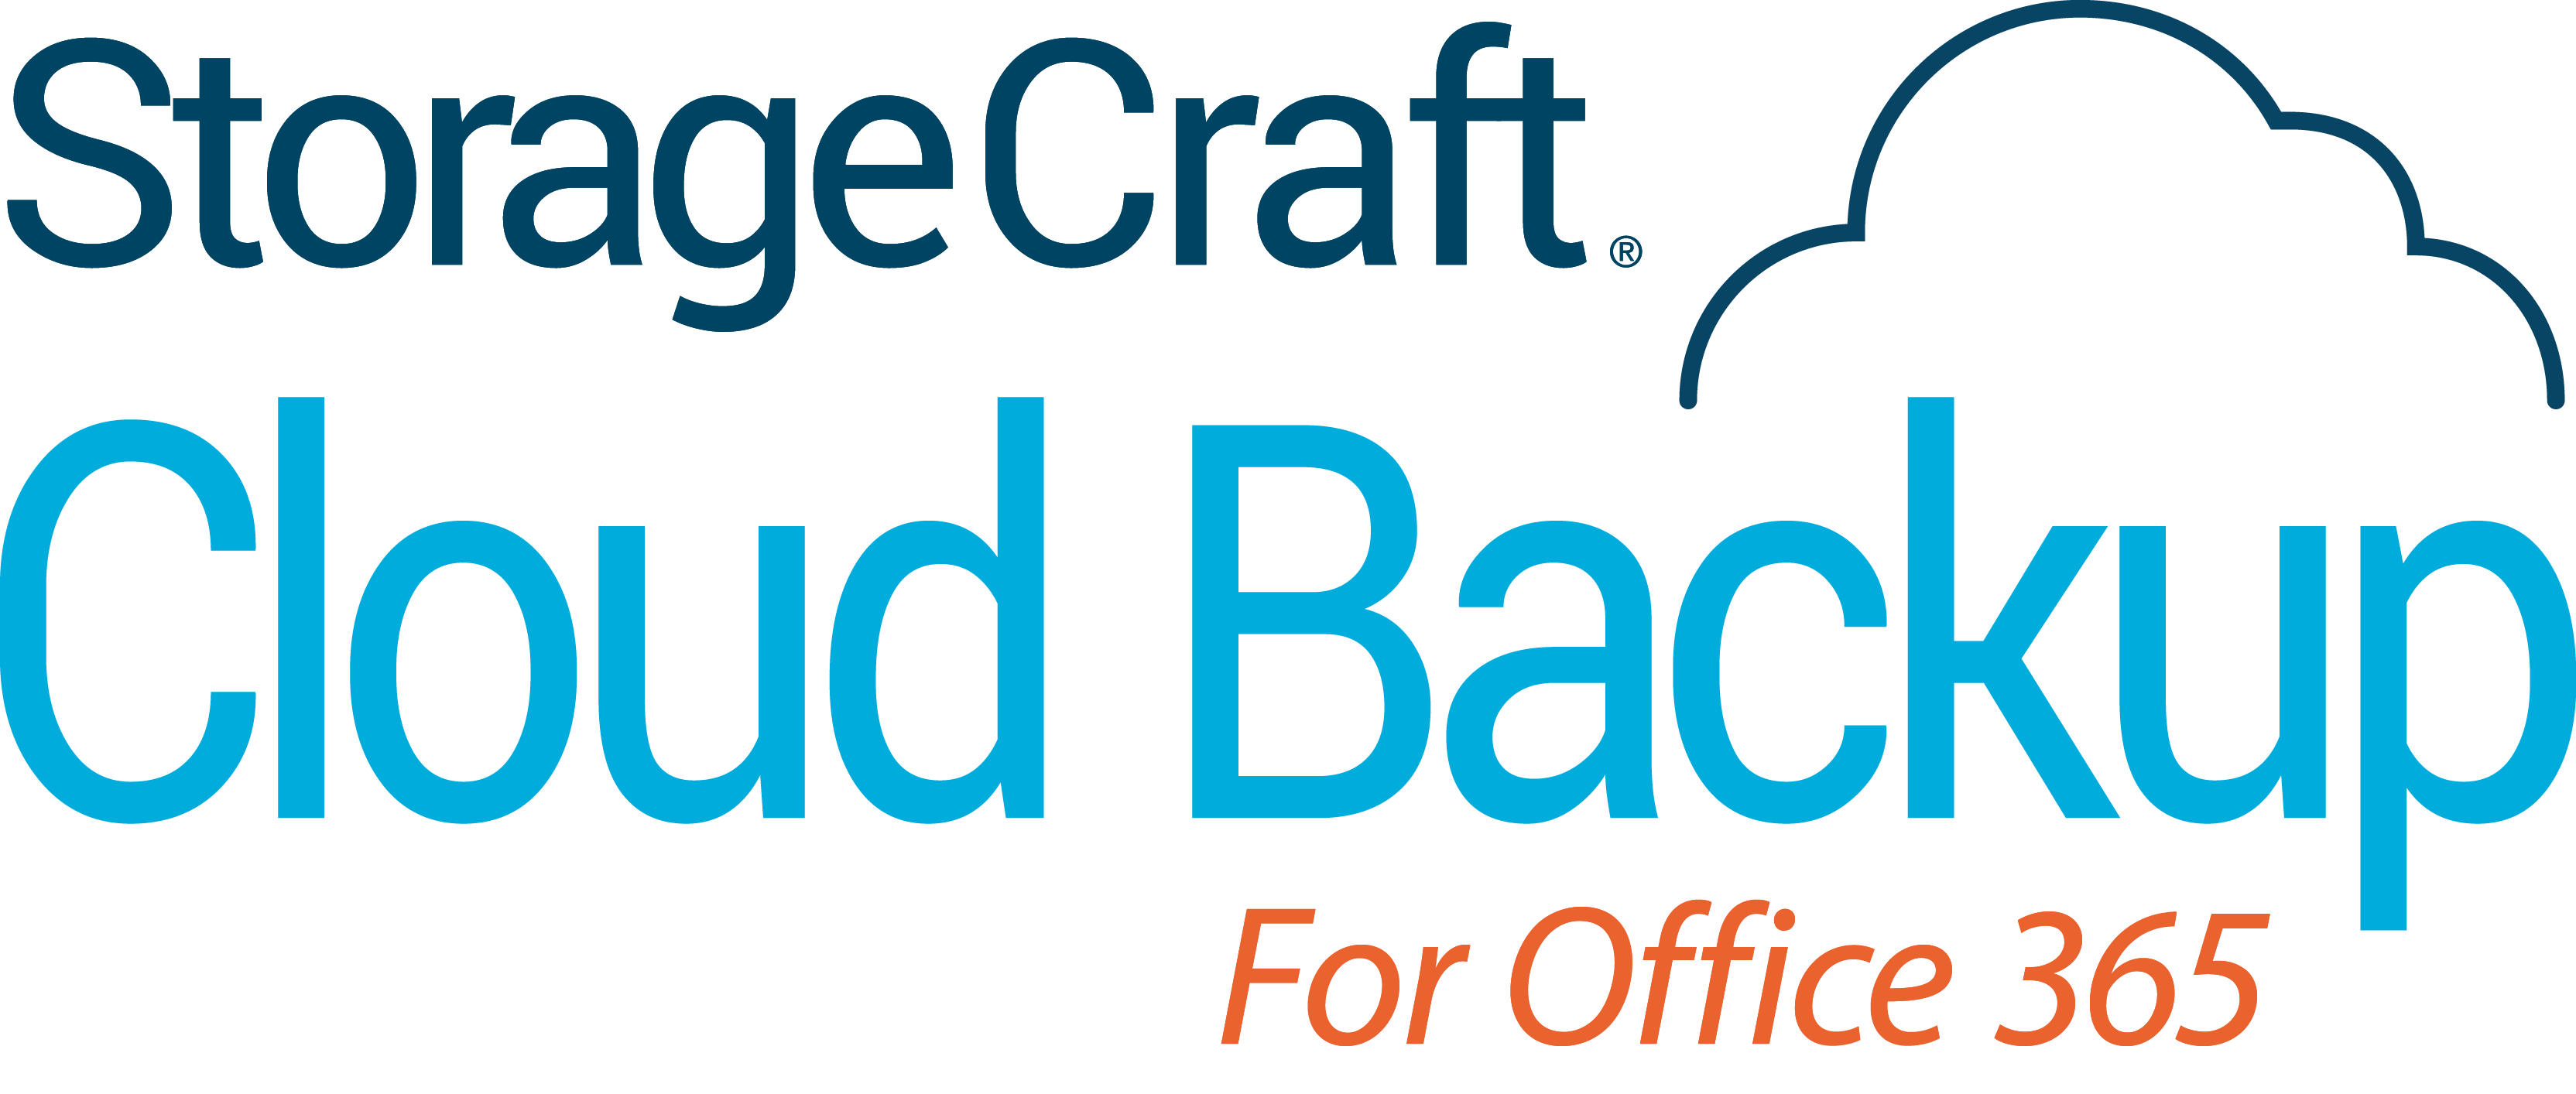 Microsoft Office 365 SharePoint Logo - Cloud Backup for Office 365 incl Sharepoint, OneDrive | StorageCraft